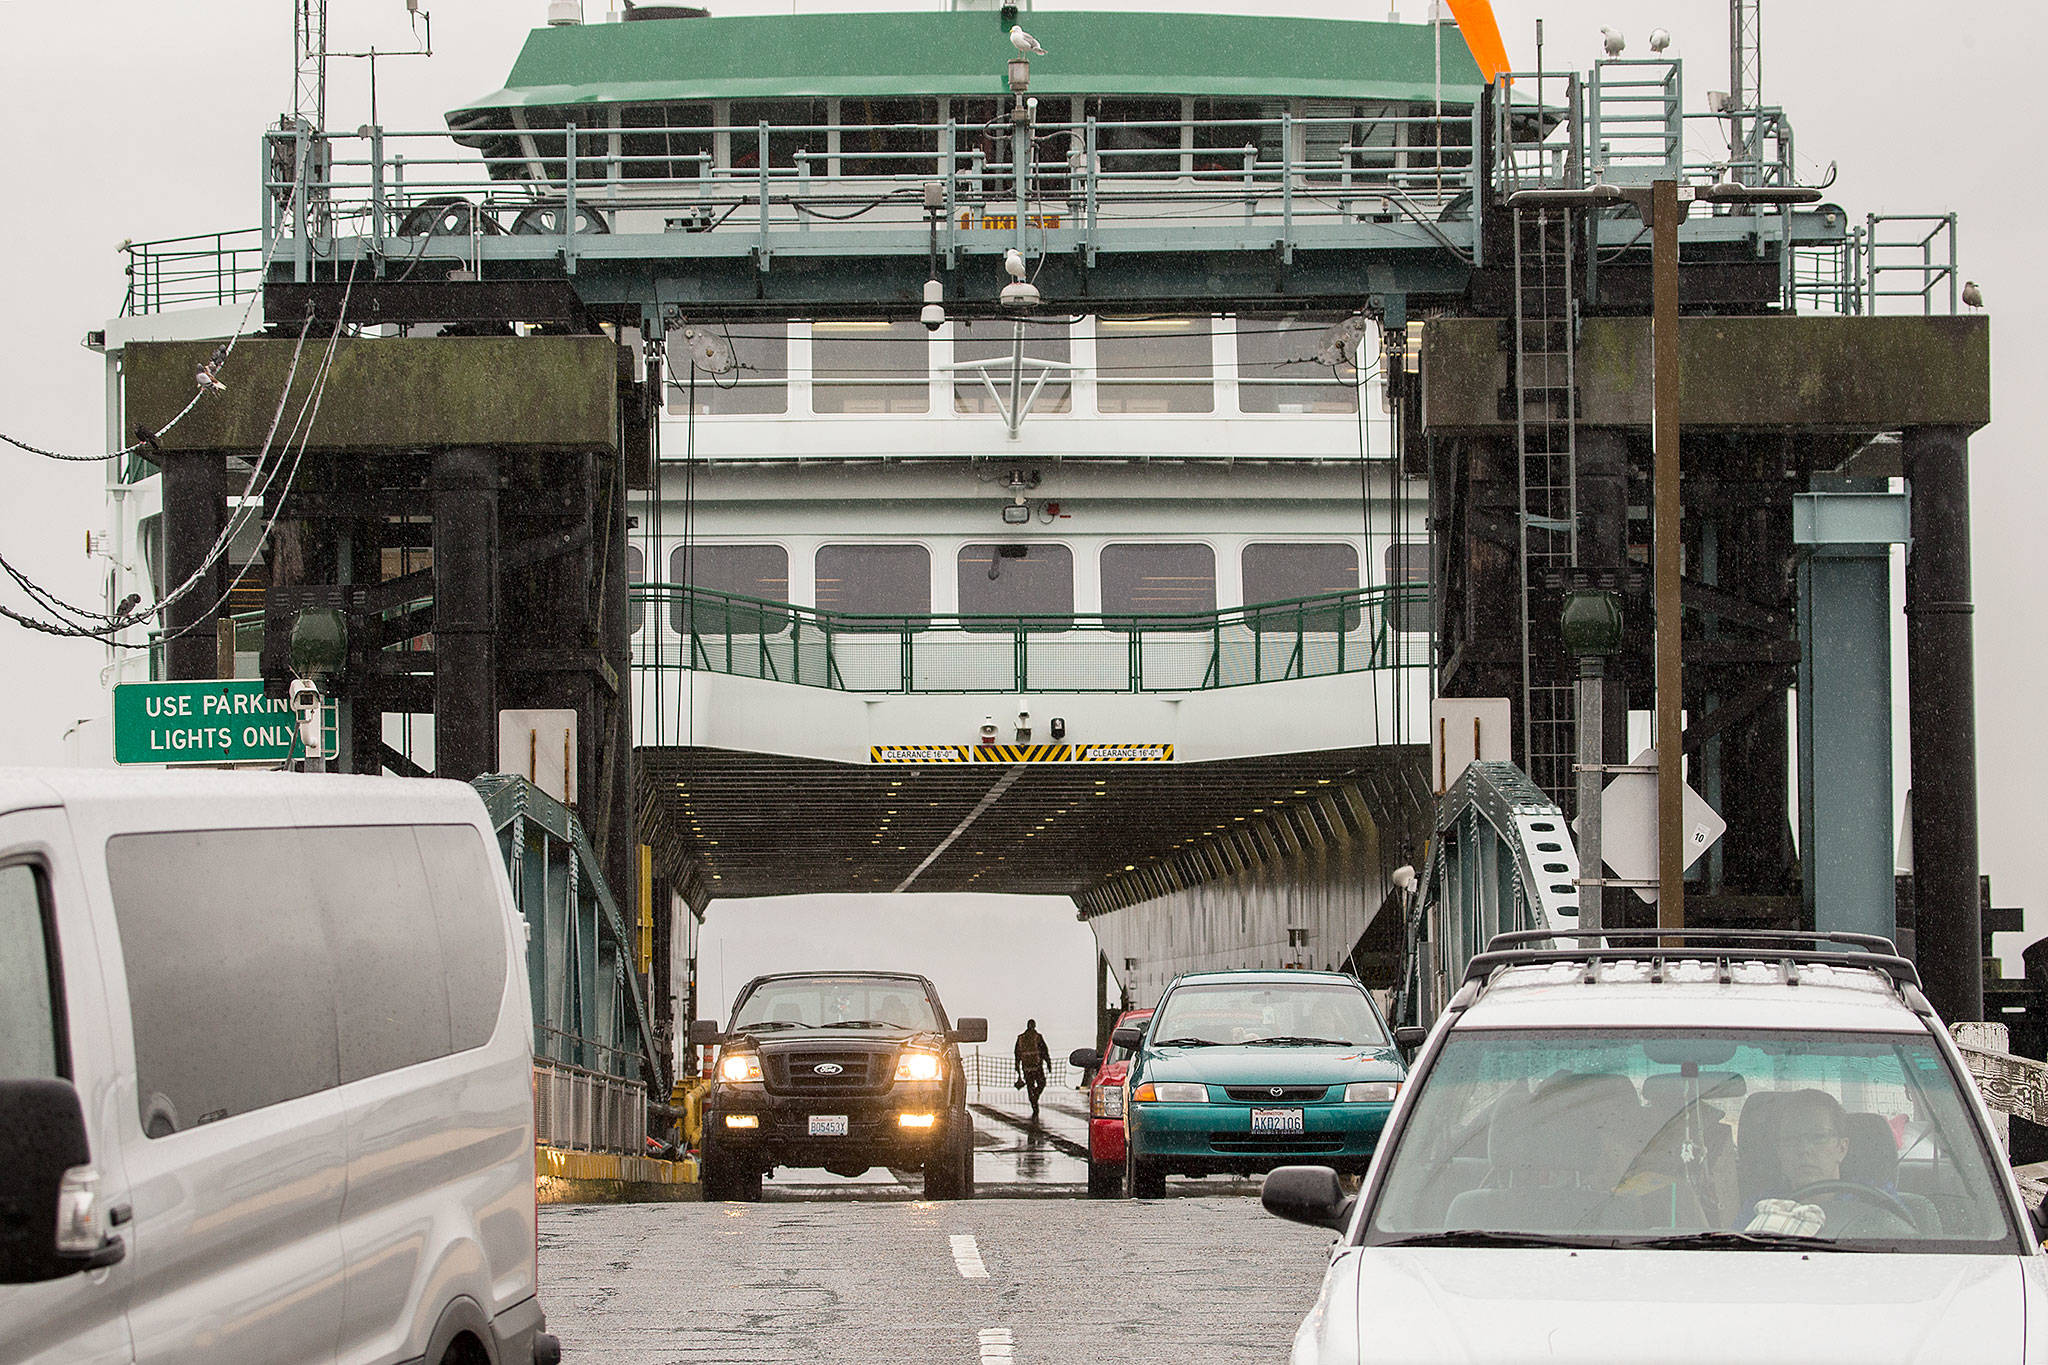 Commuters from Whidbey Island disembark their vehicles from the ferry Tokitae last February in Mukilteo. (Andy Bronson / Herald file)